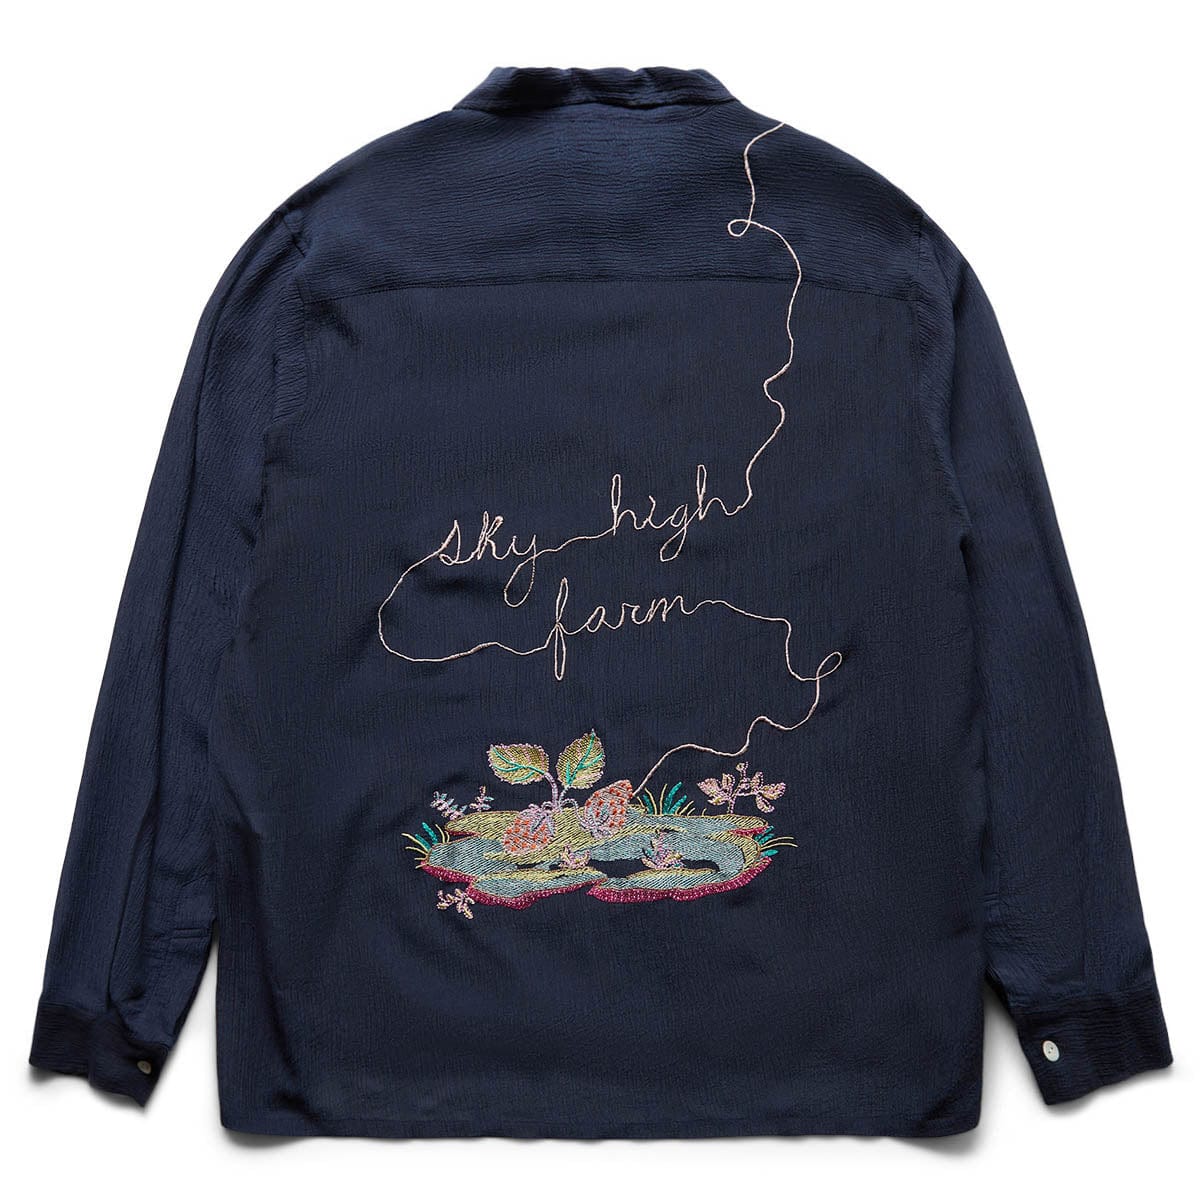 Sky High Farm Workwear STRAWBERRY EMBROIDERED WOVEN SHIRT NAVY